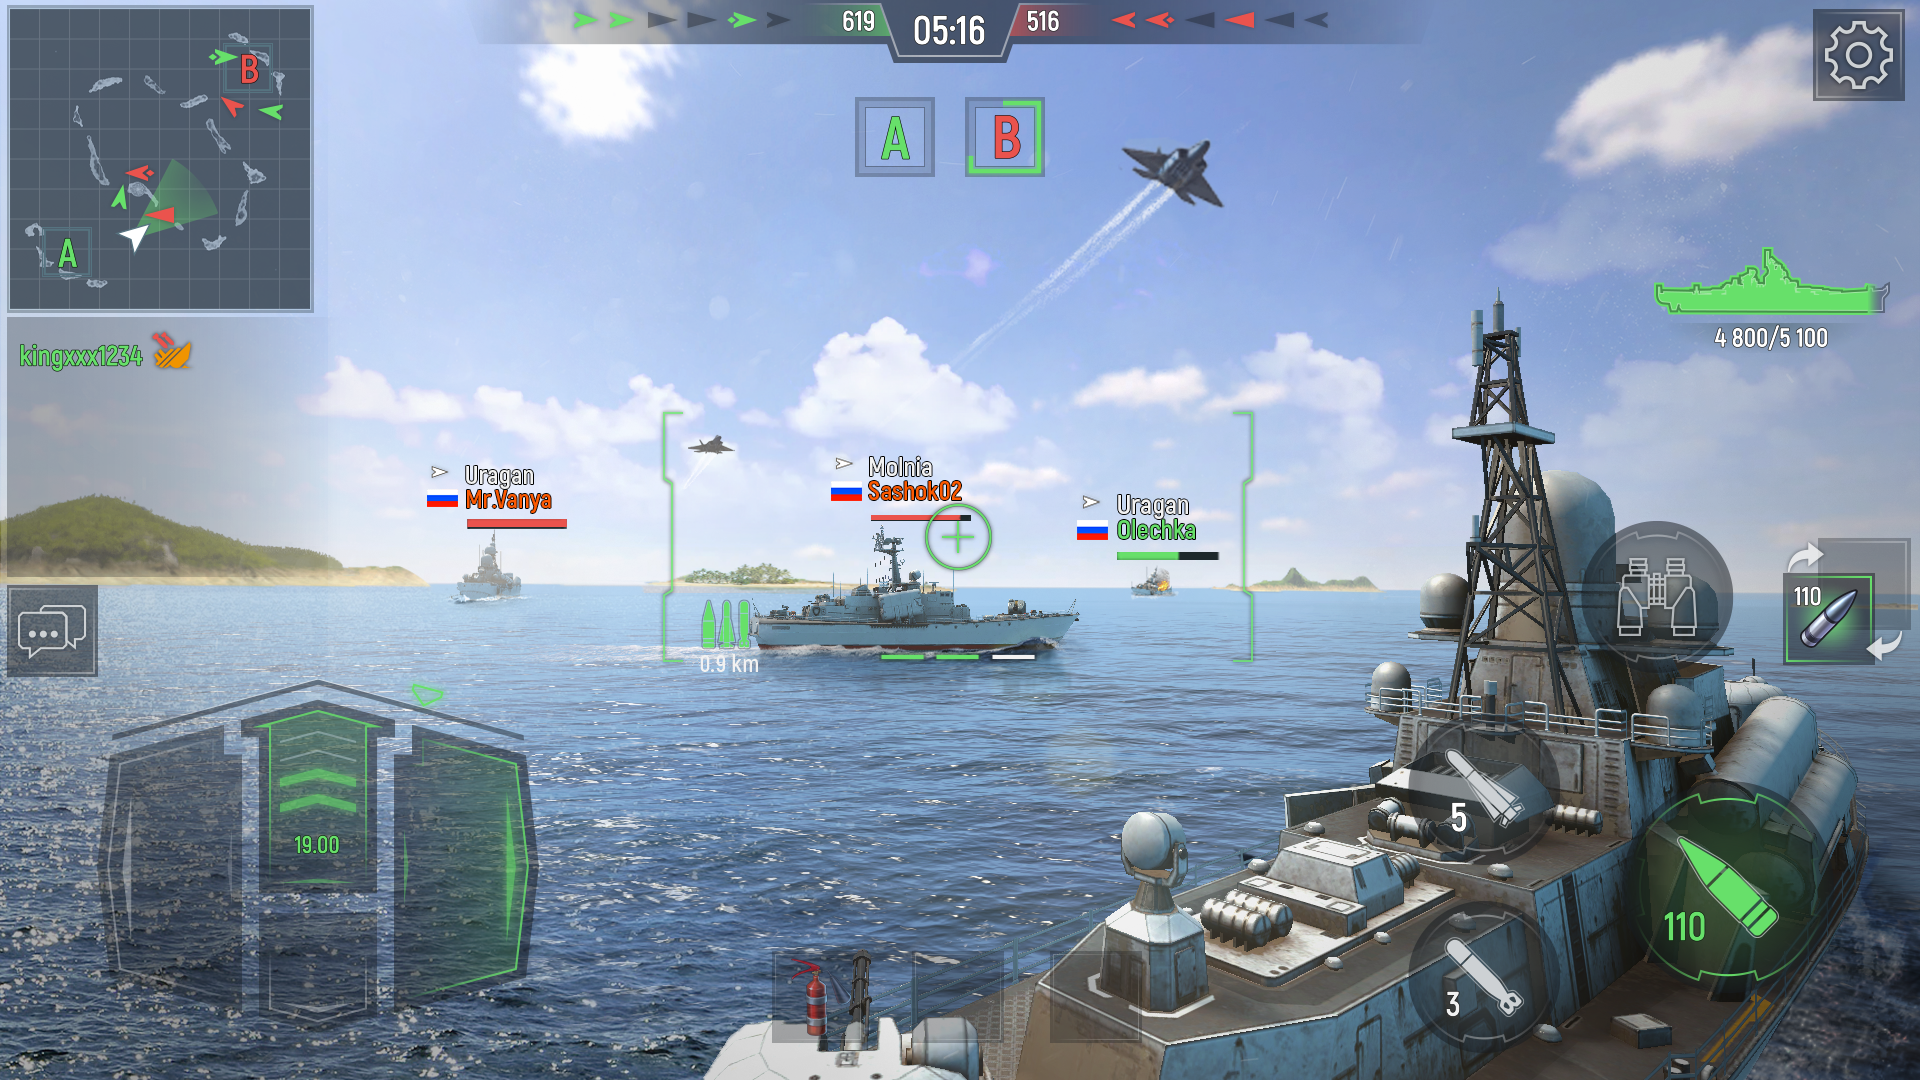 Screenshot 1 of Force of Warships: Jeux Guerre 6.00.5